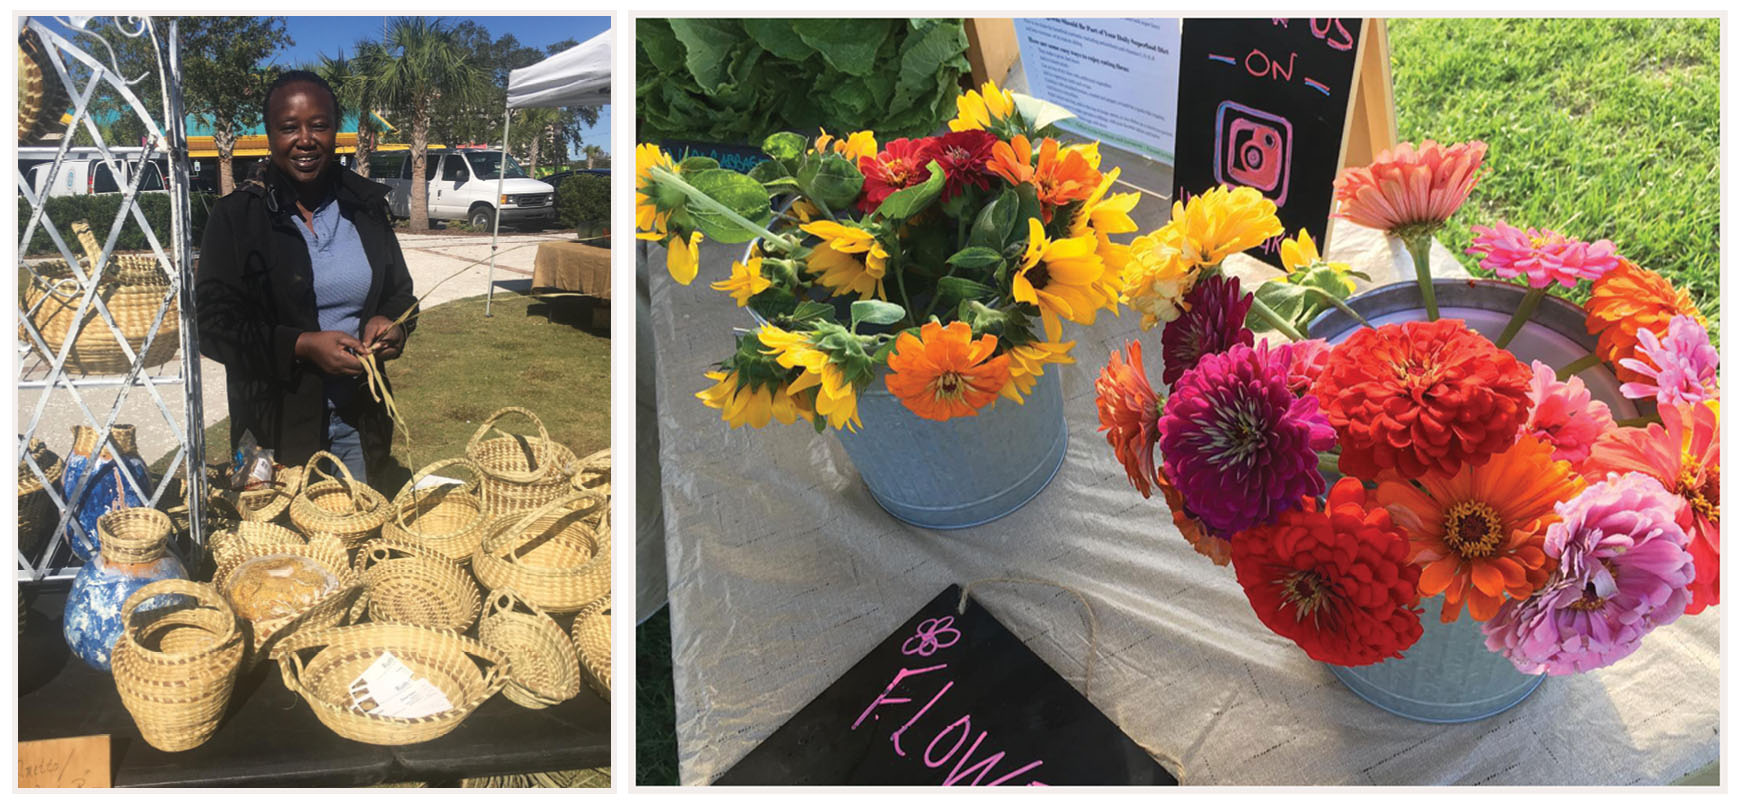 Myrtle Beach Area Farmers Markets Offer Local Produce and More Myrtle